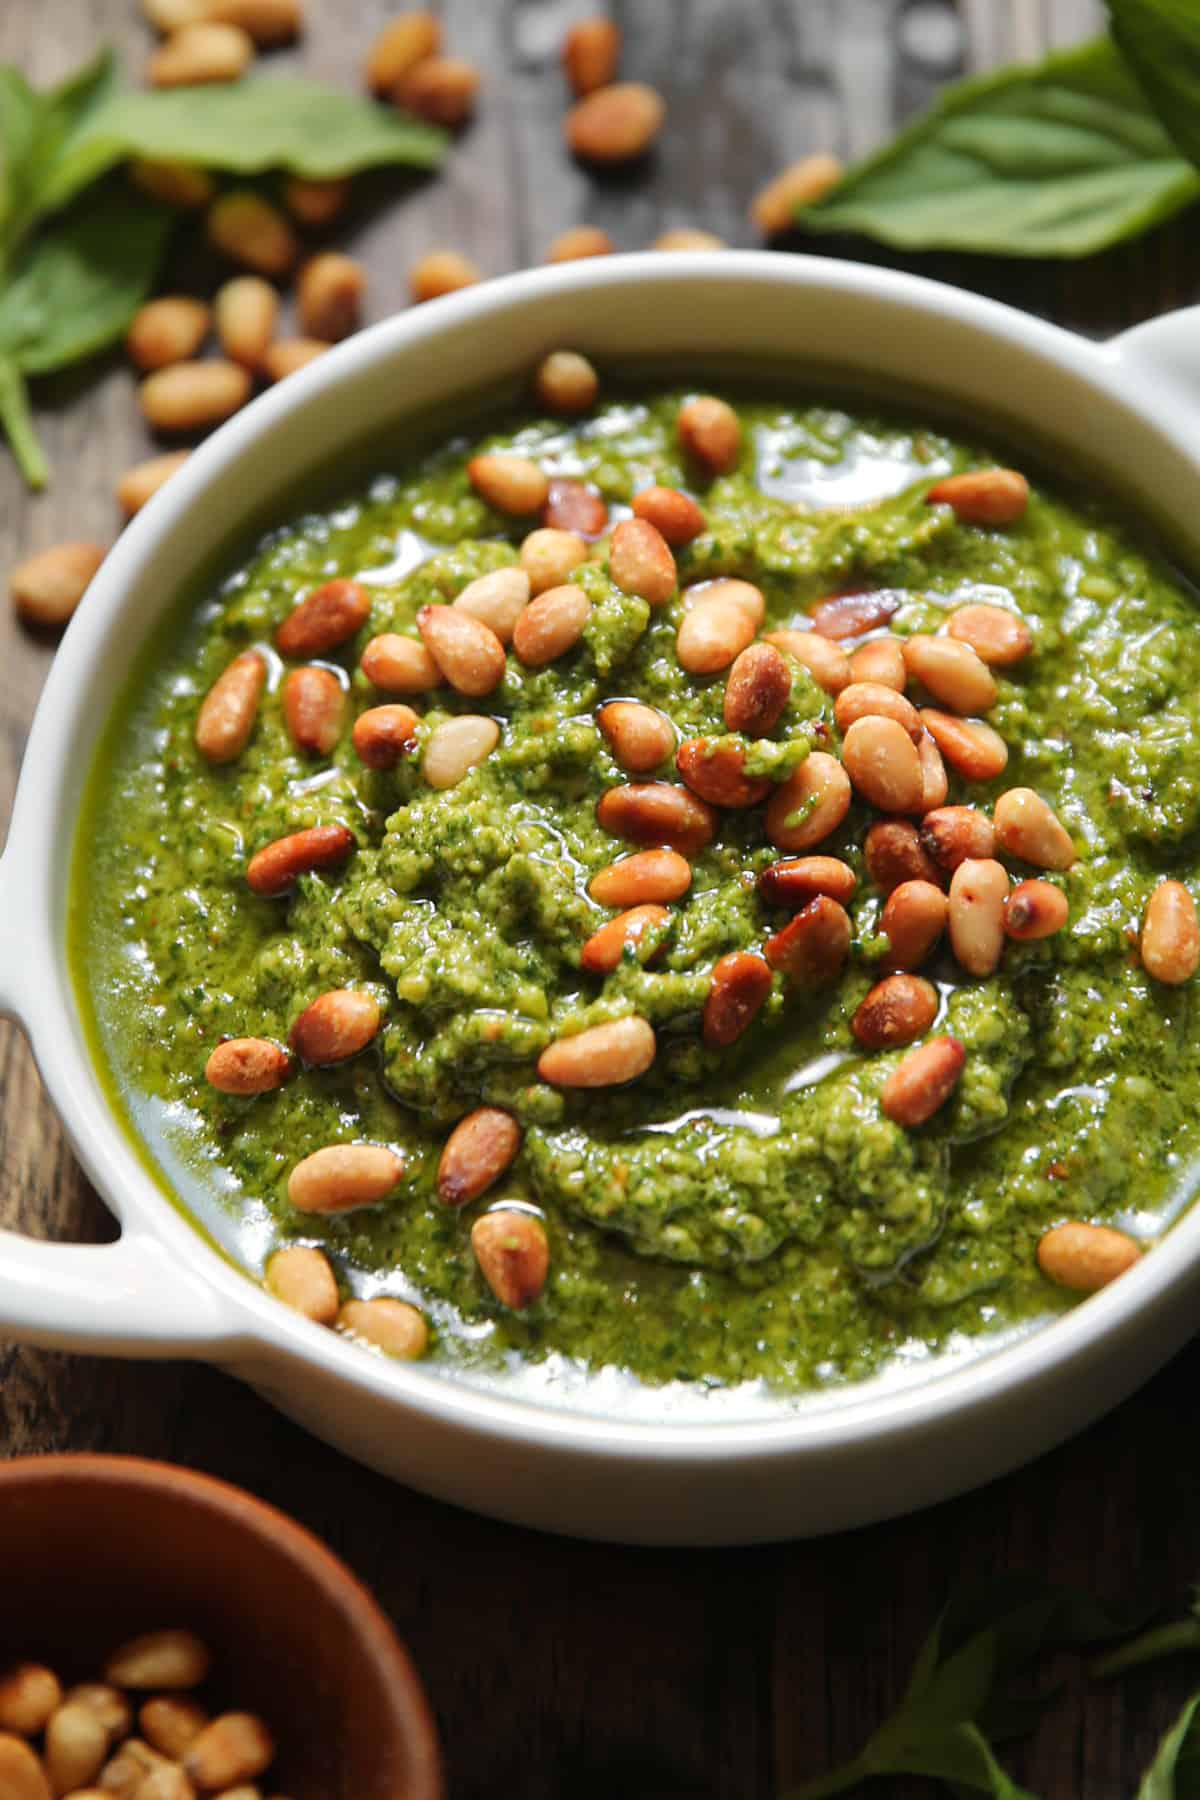 basil pesto with pine nuts on top in a small white serving dish.